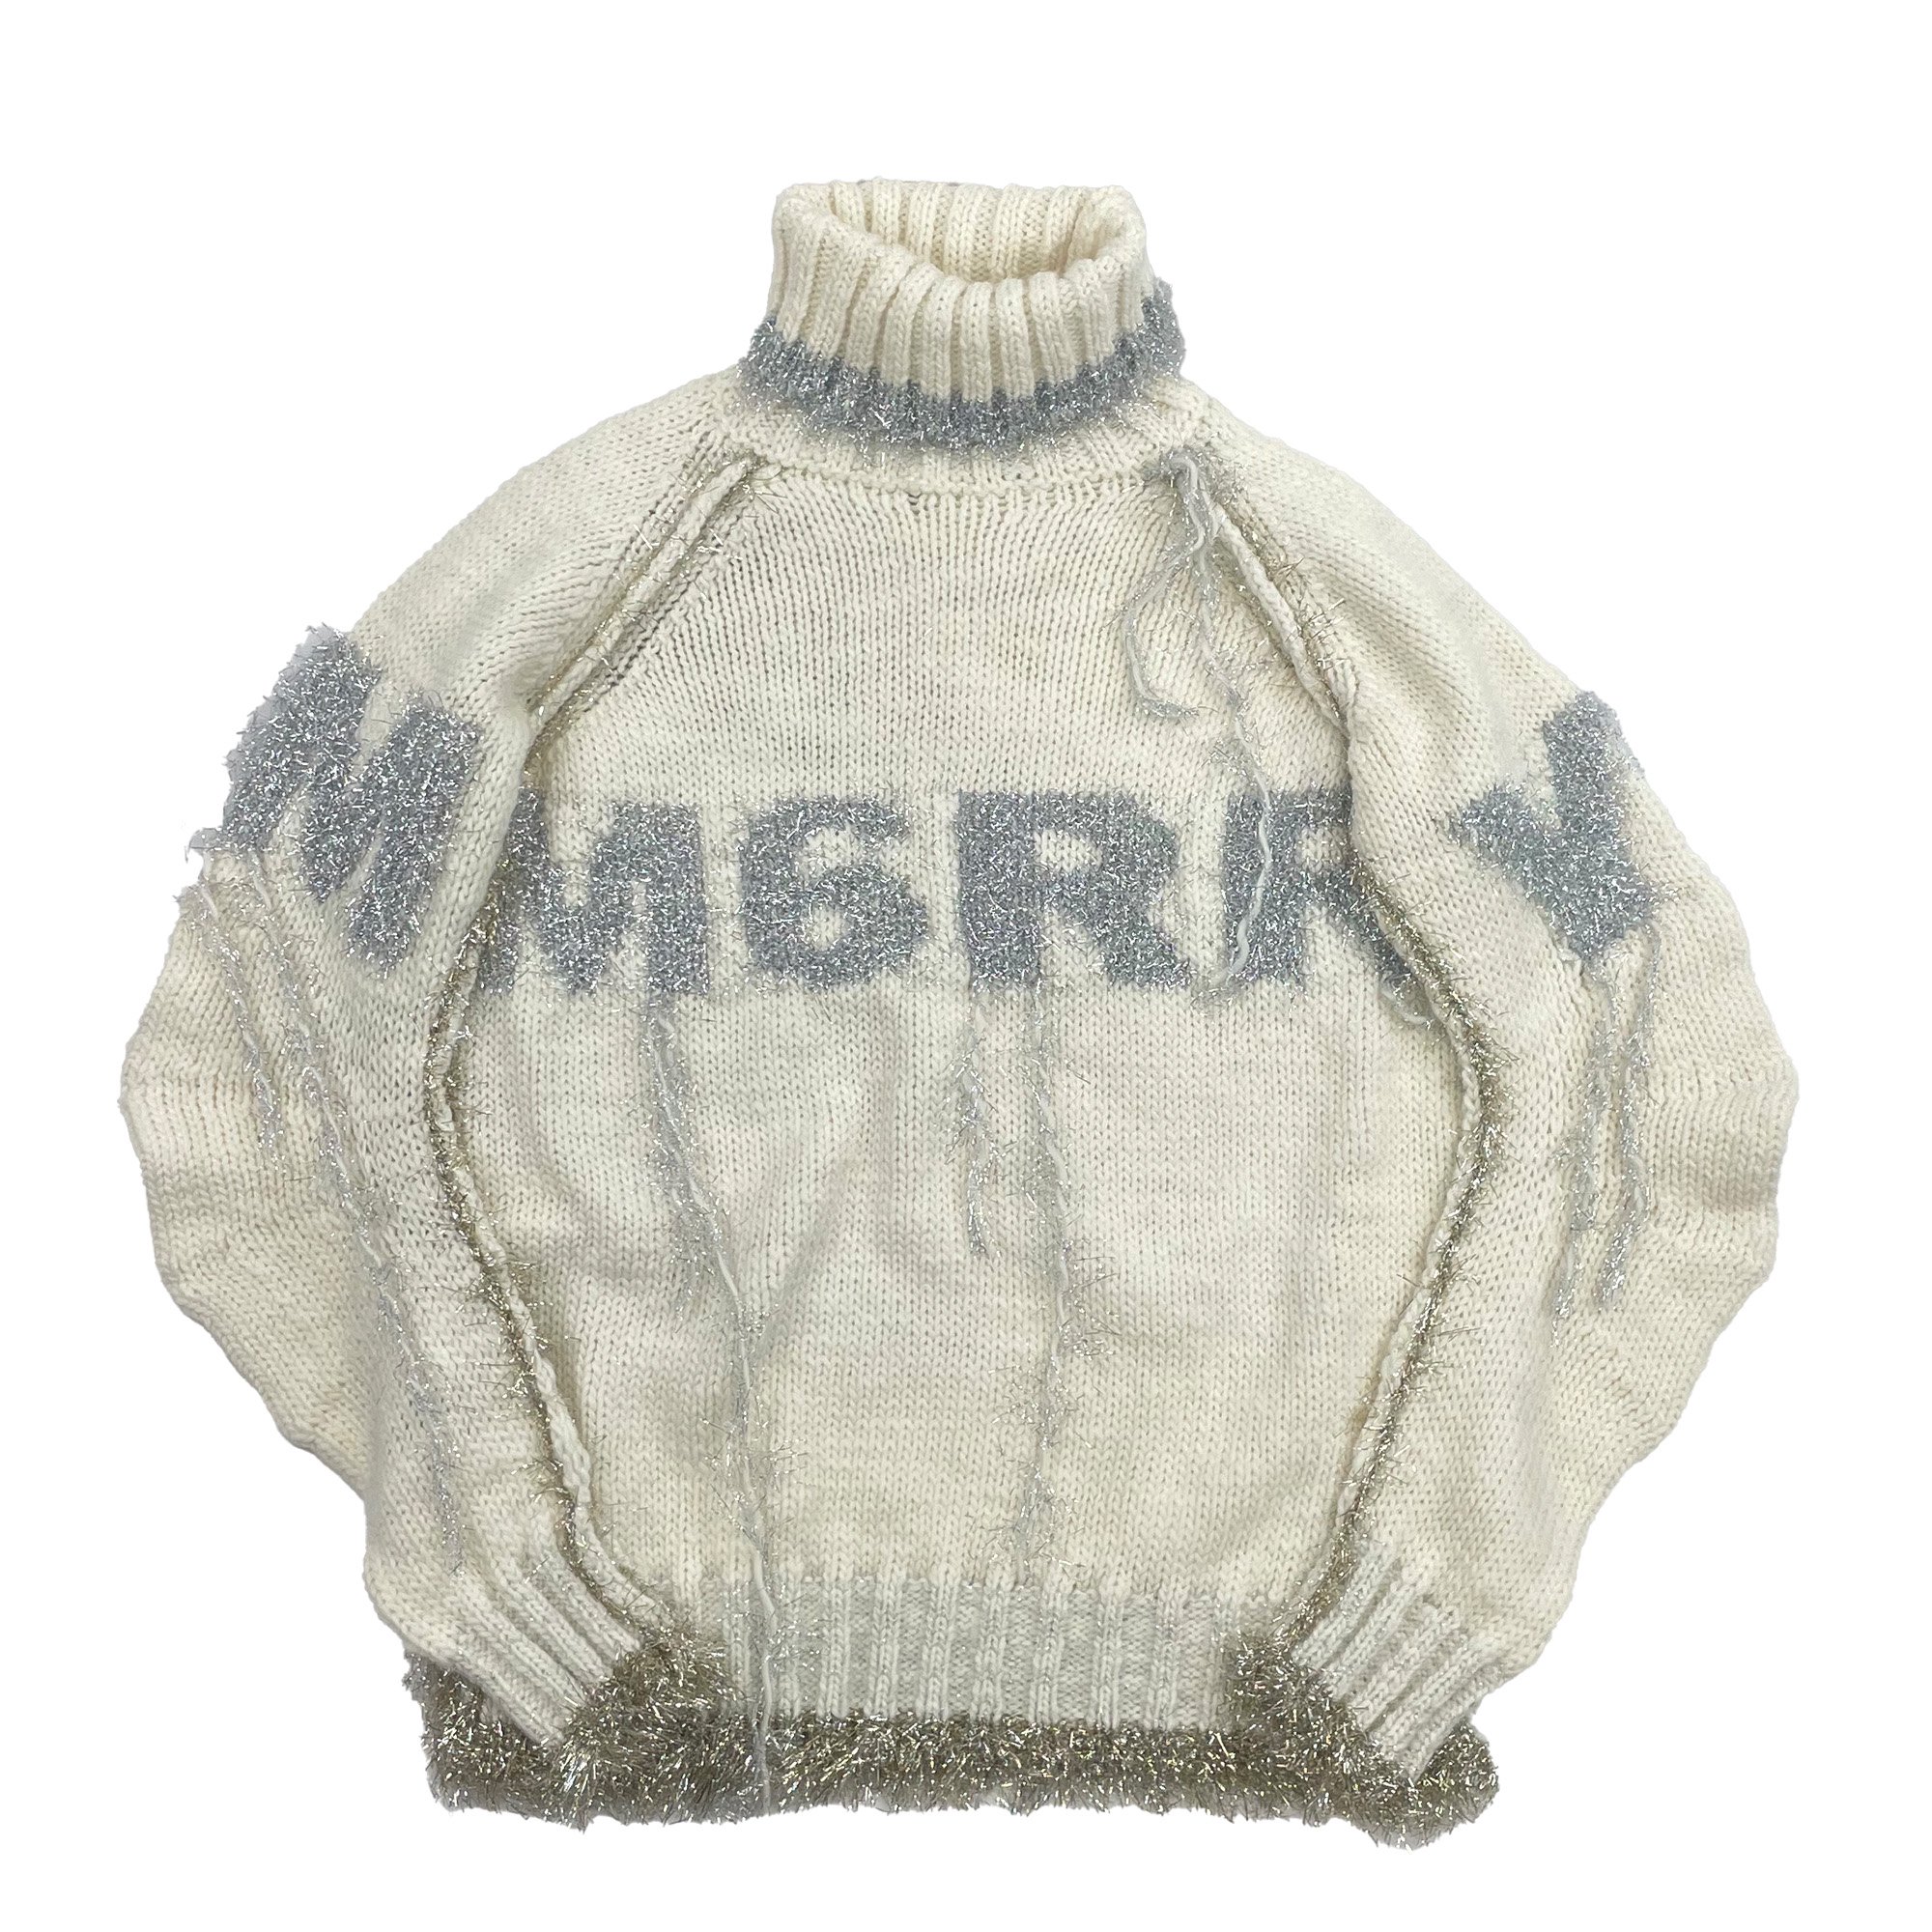 <img class='new_mark_img1' src='https://img.shop-pro.jp/img/new/icons21.gif' style='border:none;display:inline;margin:0px;padding:0px;width:auto;' />MM6 MAISON MARGIELA L/S KNIT30OFF